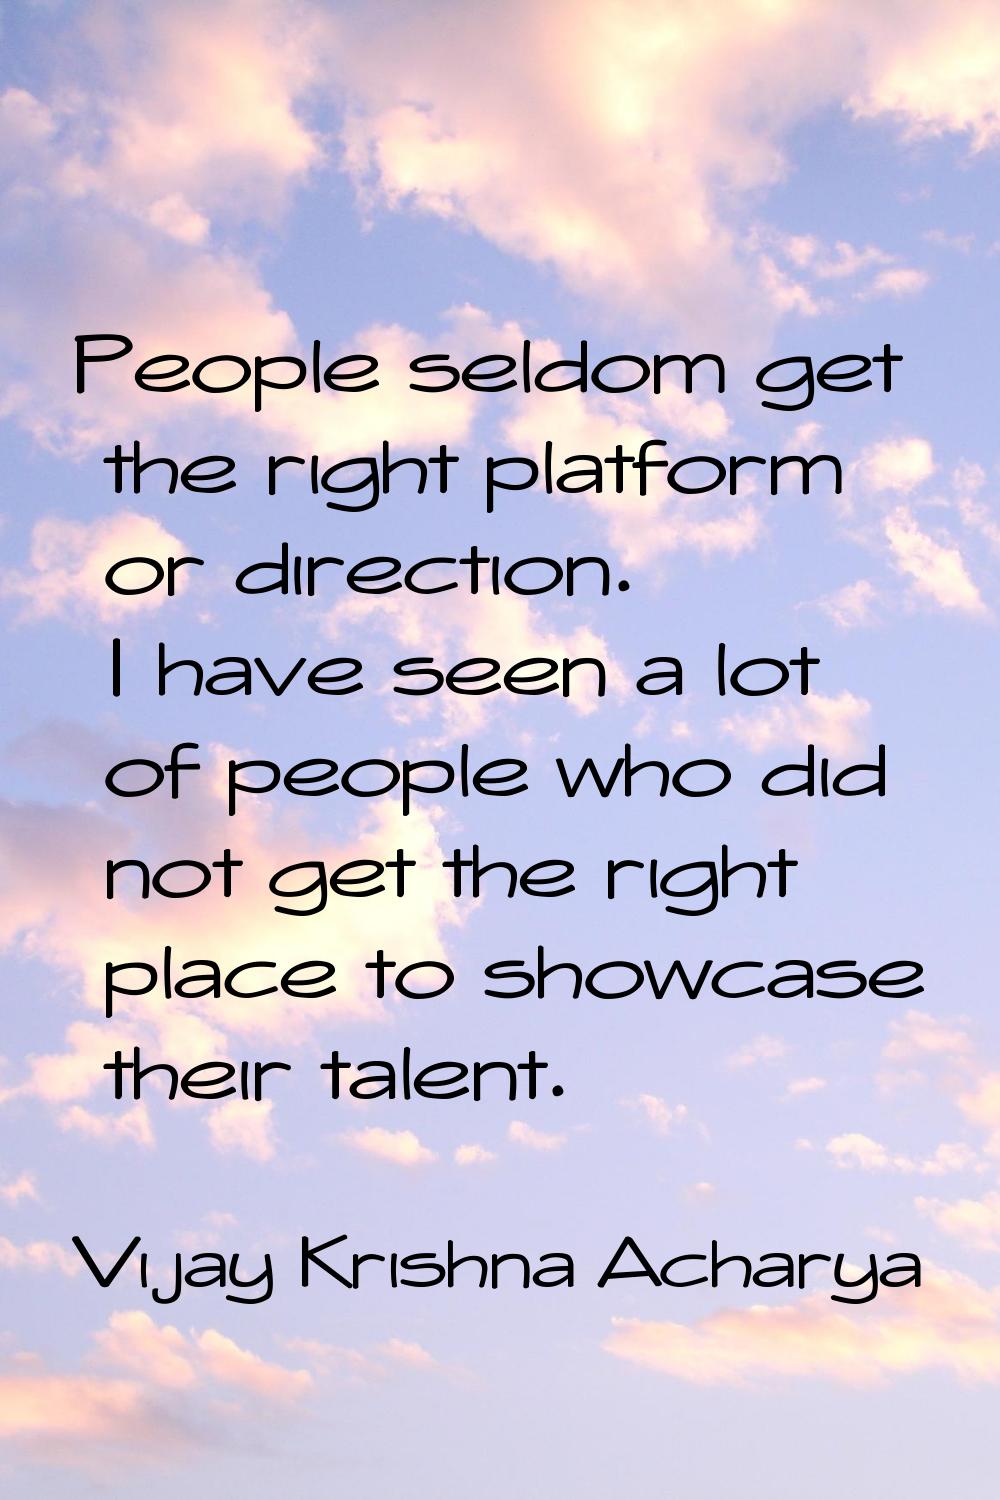 People seldom get the right platform or direction. I have seen a lot of people who did not get the 